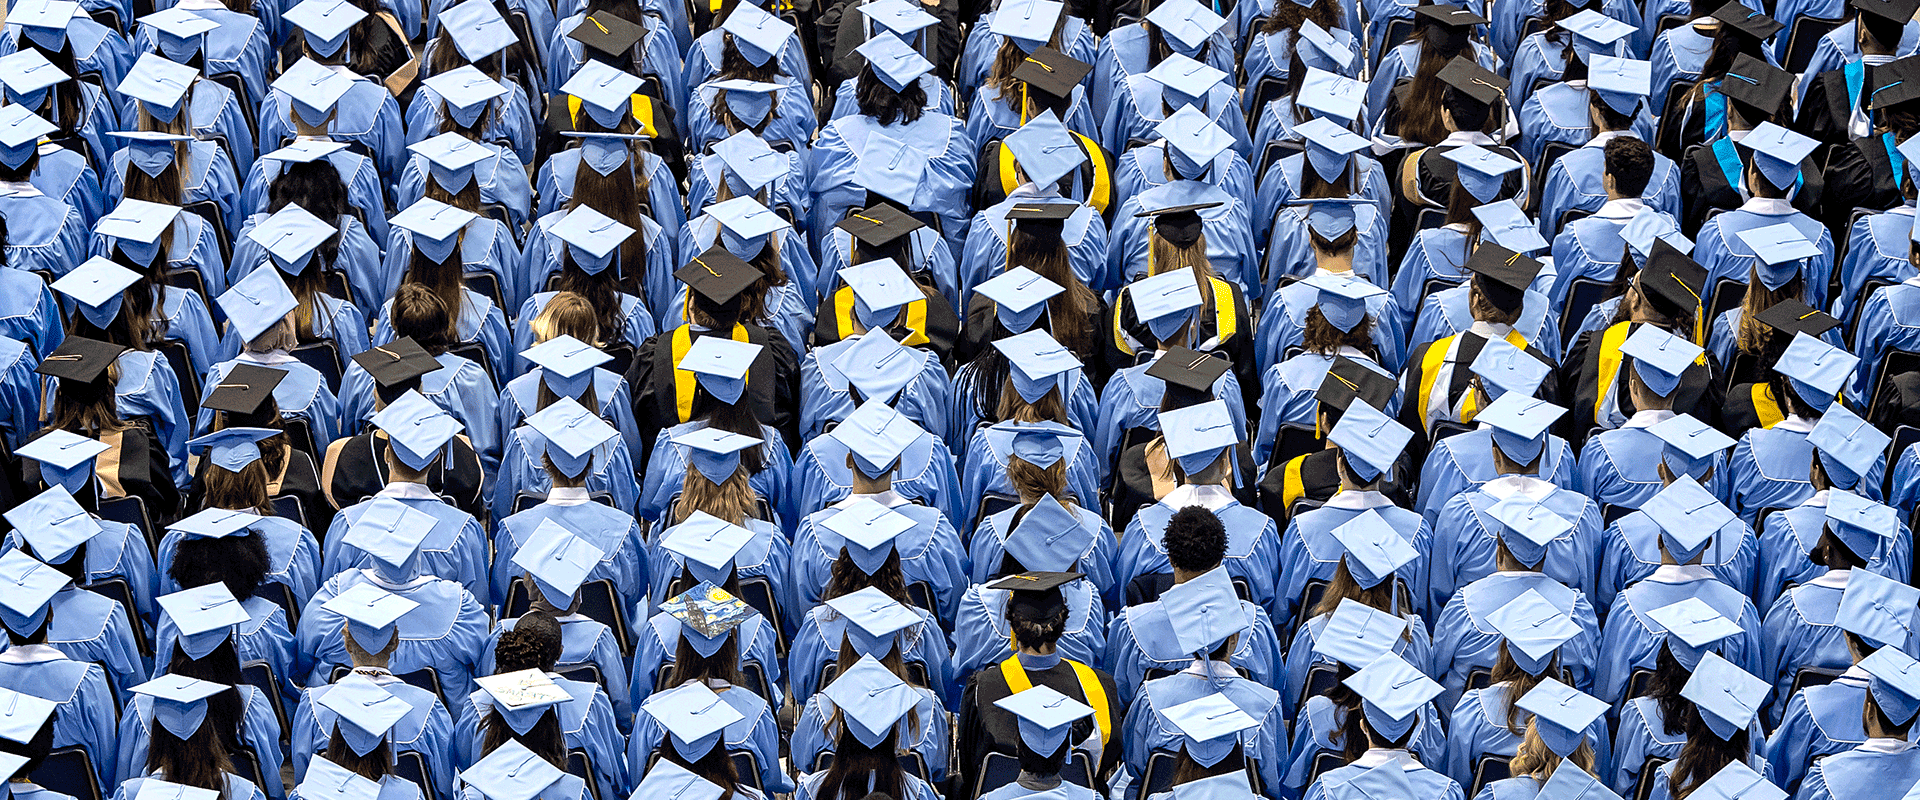 aerial view of students in regalia at commencement